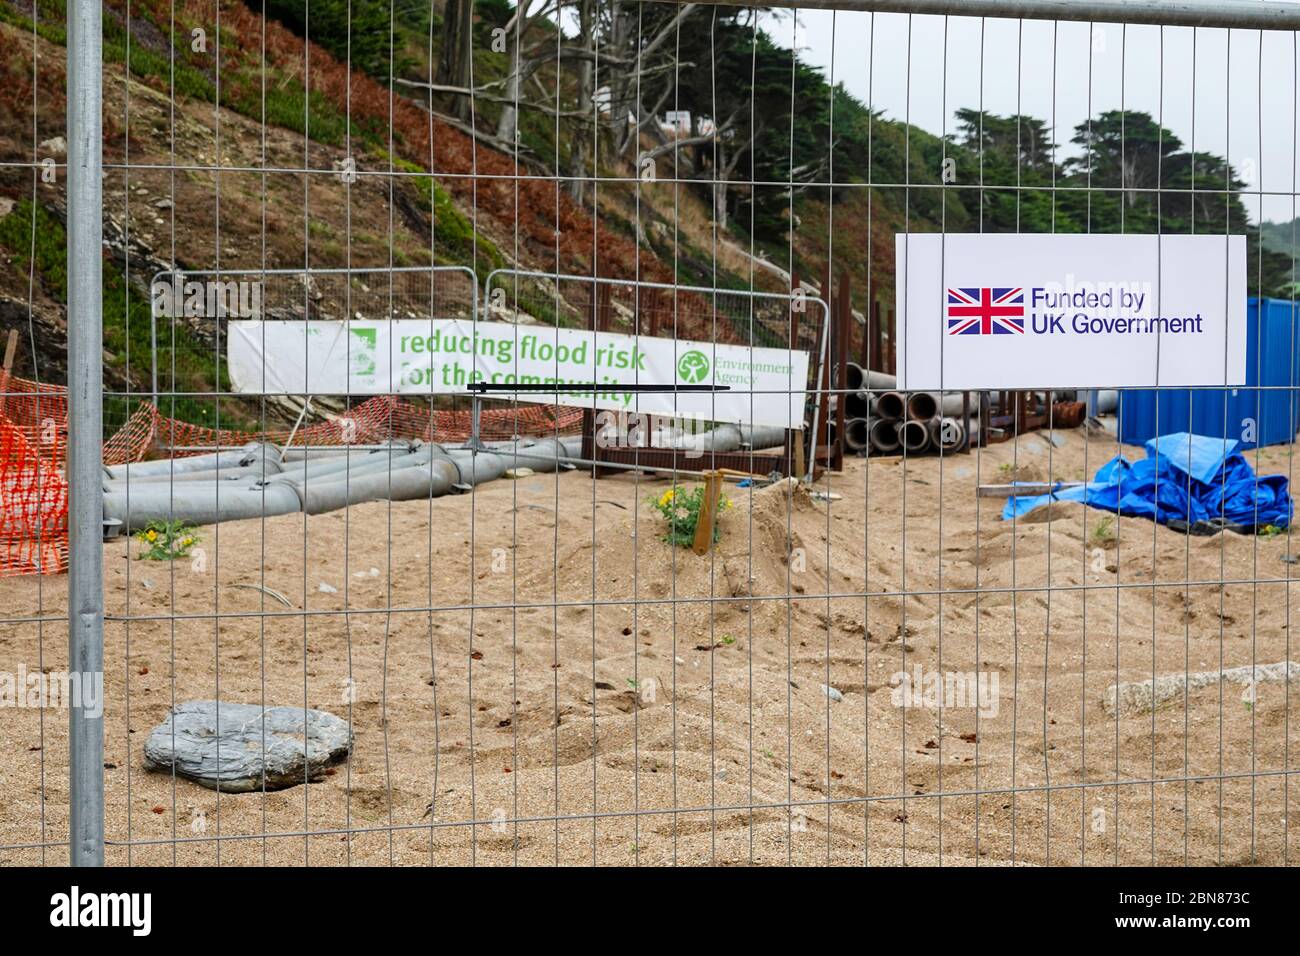 A sign saying 'funded by UK government' and a banner saying 'reducing flood risk', by the Environment Agency, England, UK Stock Photo